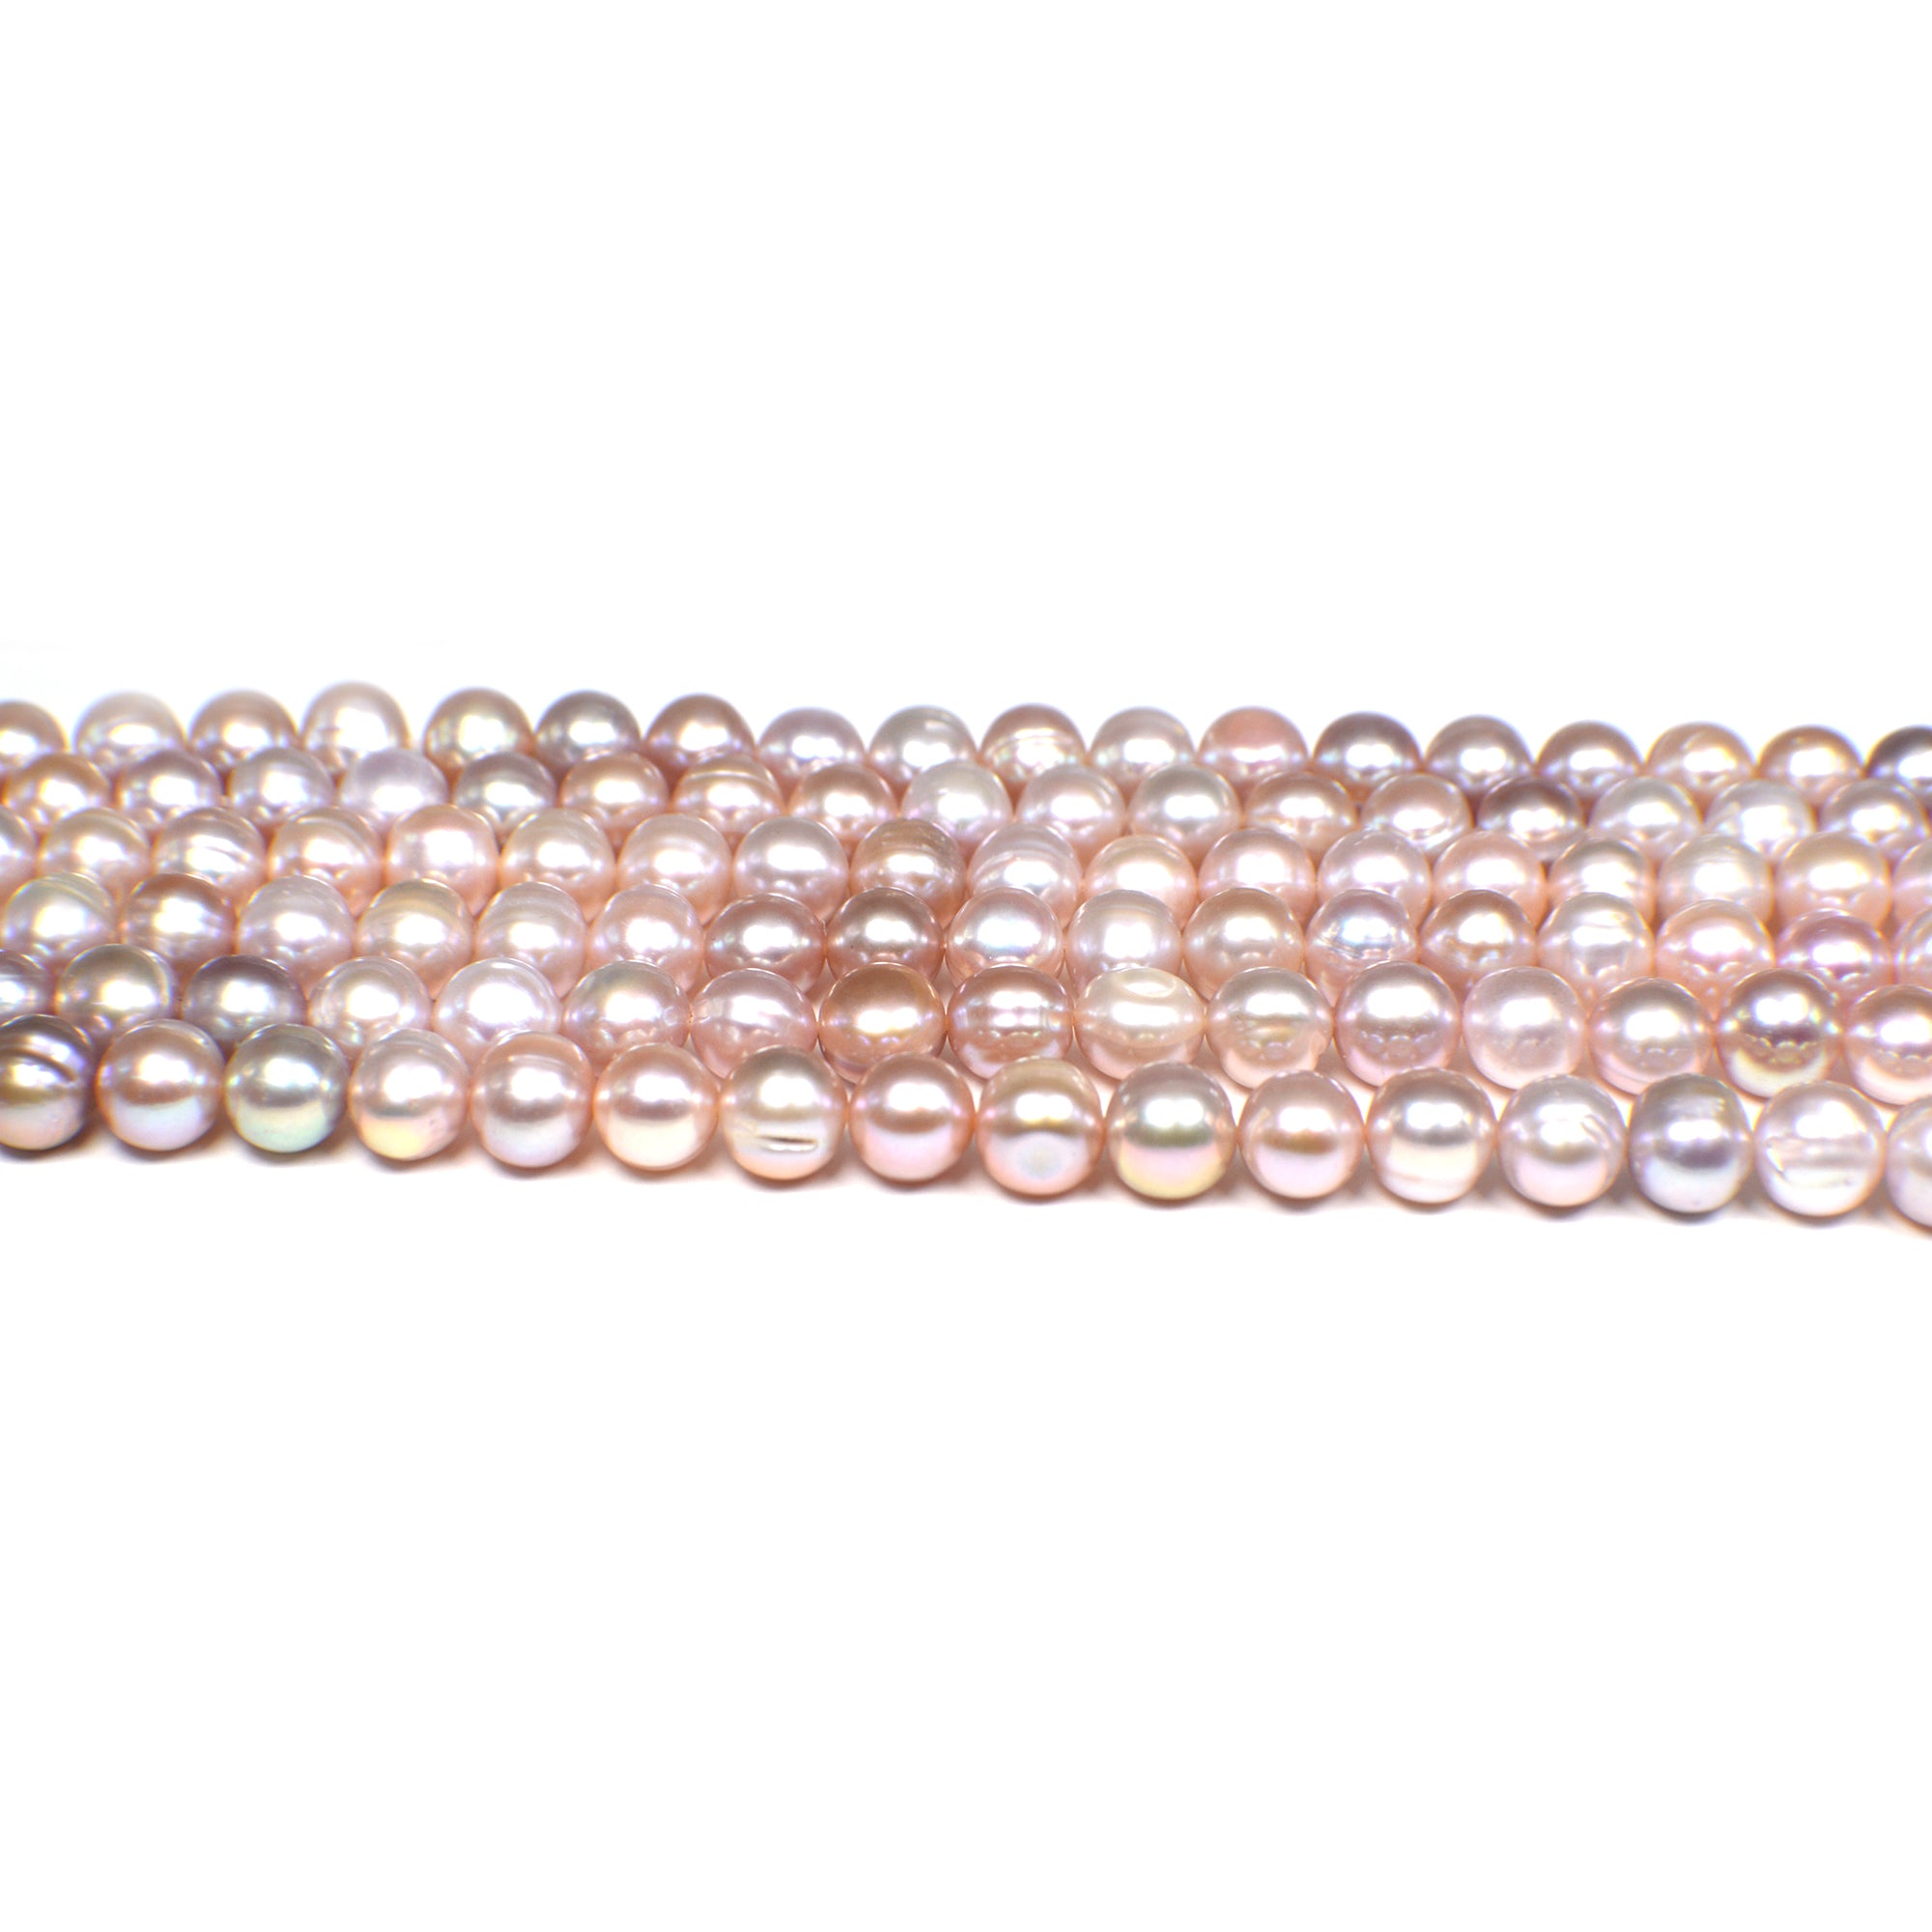 7 - 8 MM Lilac Near Round Freshwater Pearls Beads